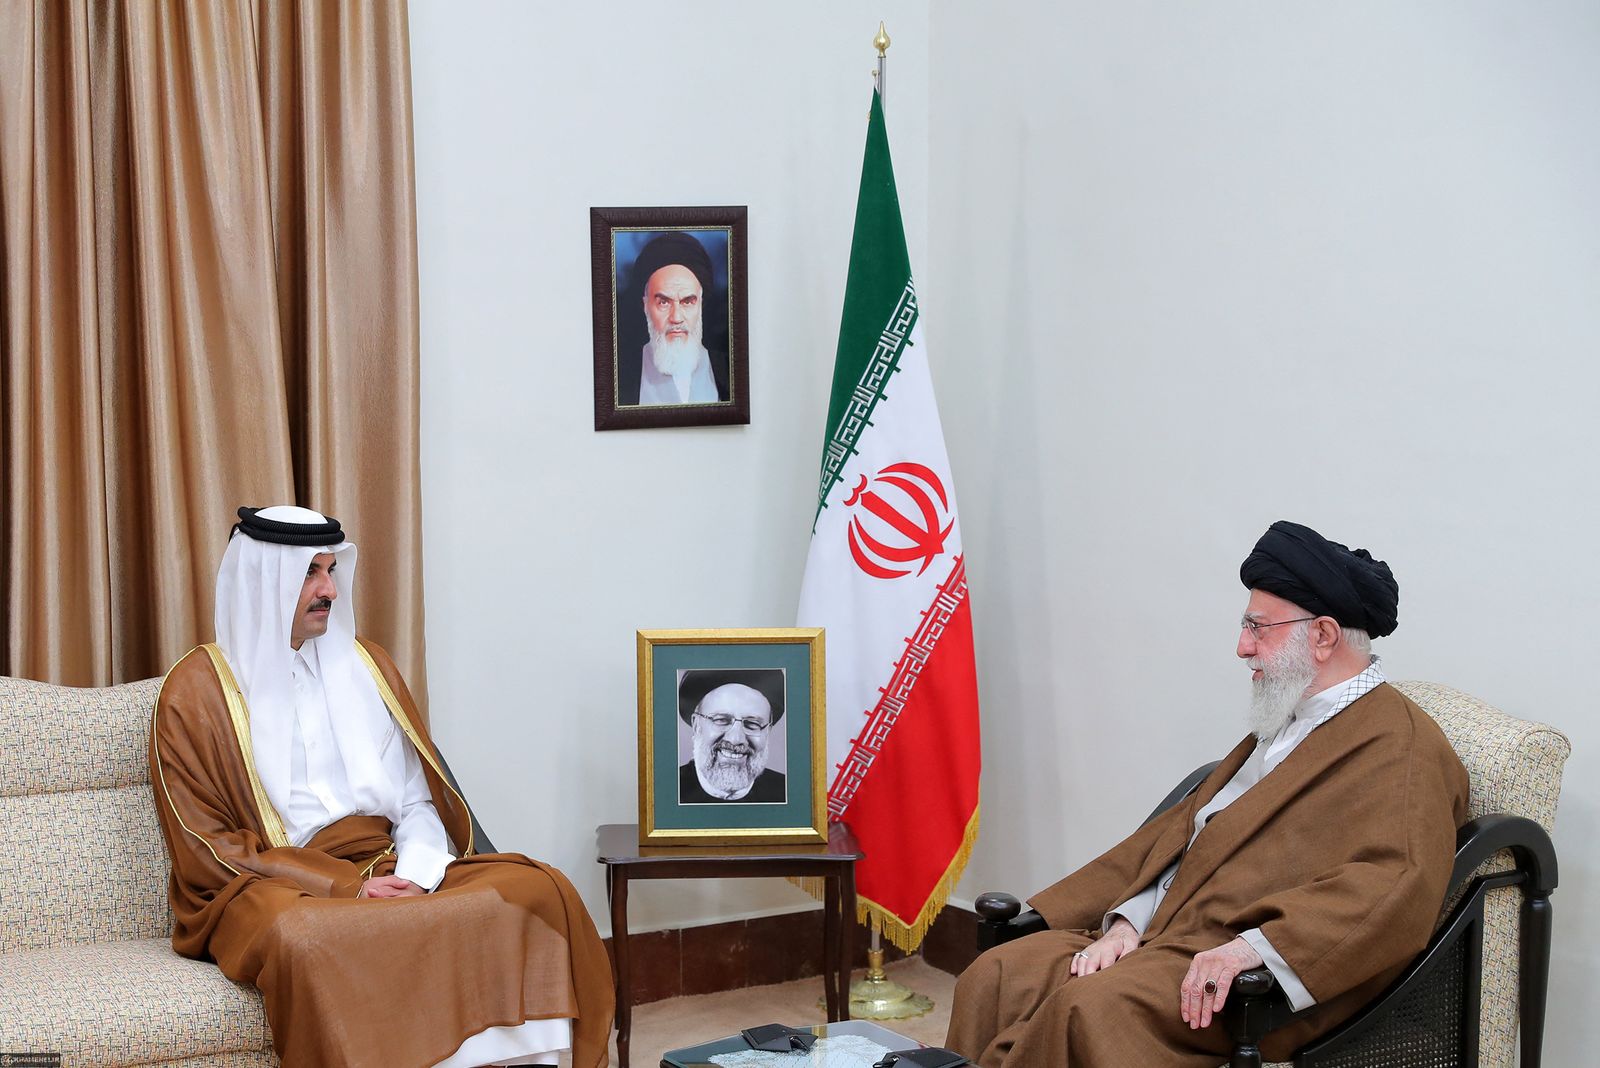 A handout picture provided by the office of Iran's Supreme Leader Ayatollah Ali Khamenei on May 22, 2024, shows him receiving Qatar's Emir Sheikh Tamim bin Hamad al-Thani in Tehran, as leaders offer condolences for the death of the country's President Ibrahim Raisi and his entourage in a helicopter crash. Raisi was confirmed dead along with his foreign minister Hossein Amir-Abdollahian and six others on May 20, 2024, after search and rescue teams found their crashed helicopter in a fog-shrouded mountain region in Iran's East Azerbaijan province, sparking mourning in the Islamic republic. (Photo by KHAMENEI.IR / AFP) / RESTRICTED TO EDITORIAL USE - MANDATORY CREDIT 'AFP PHOTO / HO / KHAMENEI.IR' - NO MARKETING NO ADVERTISING CAMPAIGNS - DISTRIBUTED AS A SERVICE TO CLIENTS